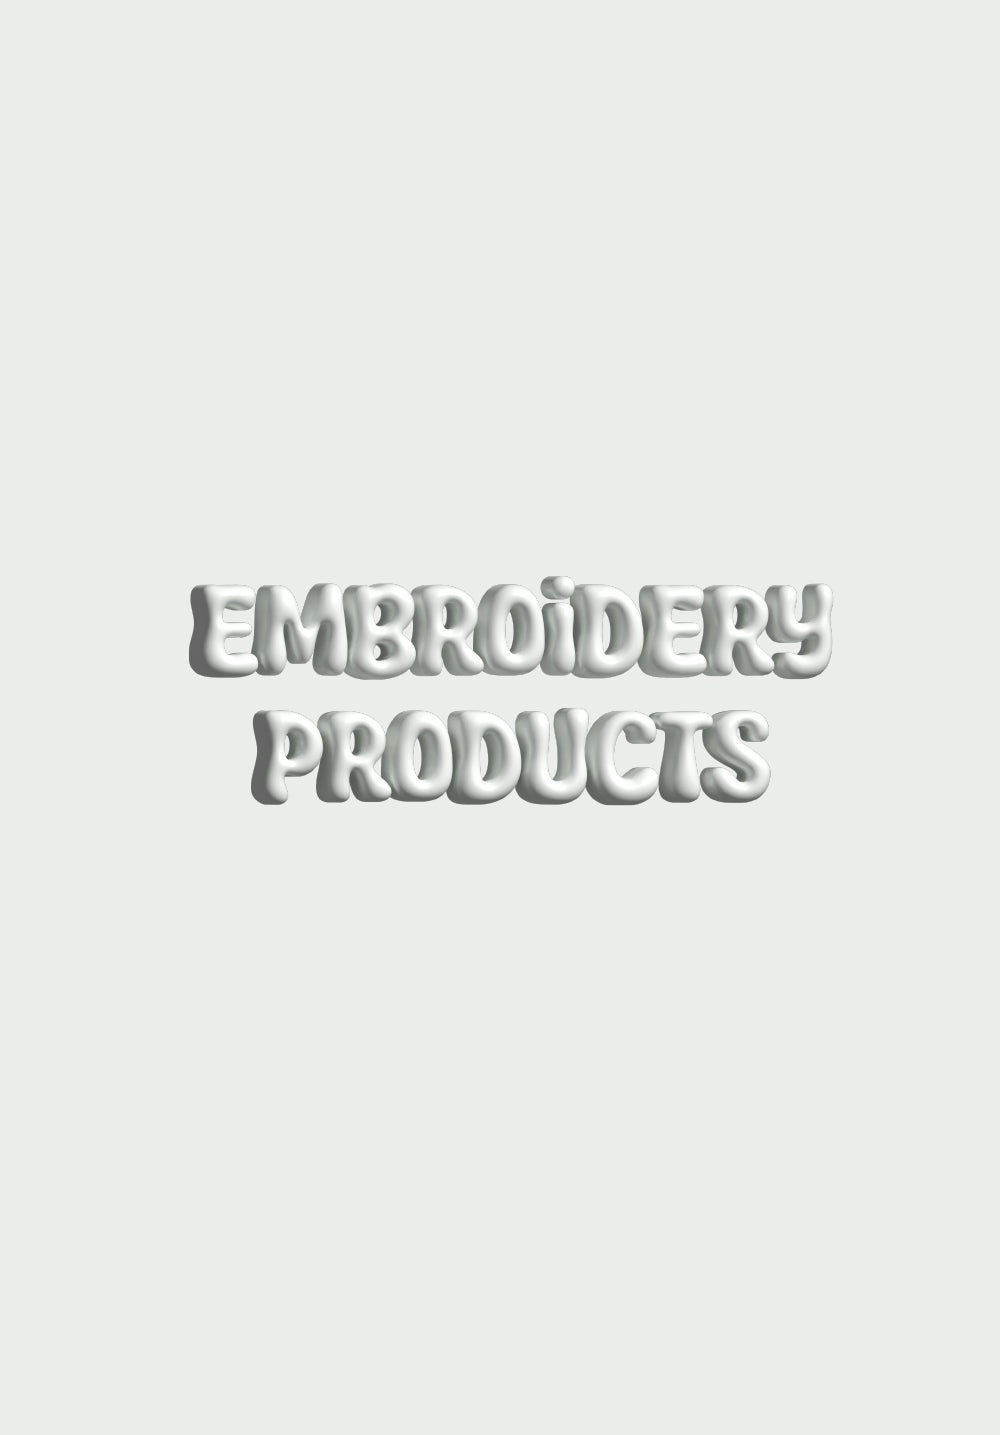 Embroidery Products